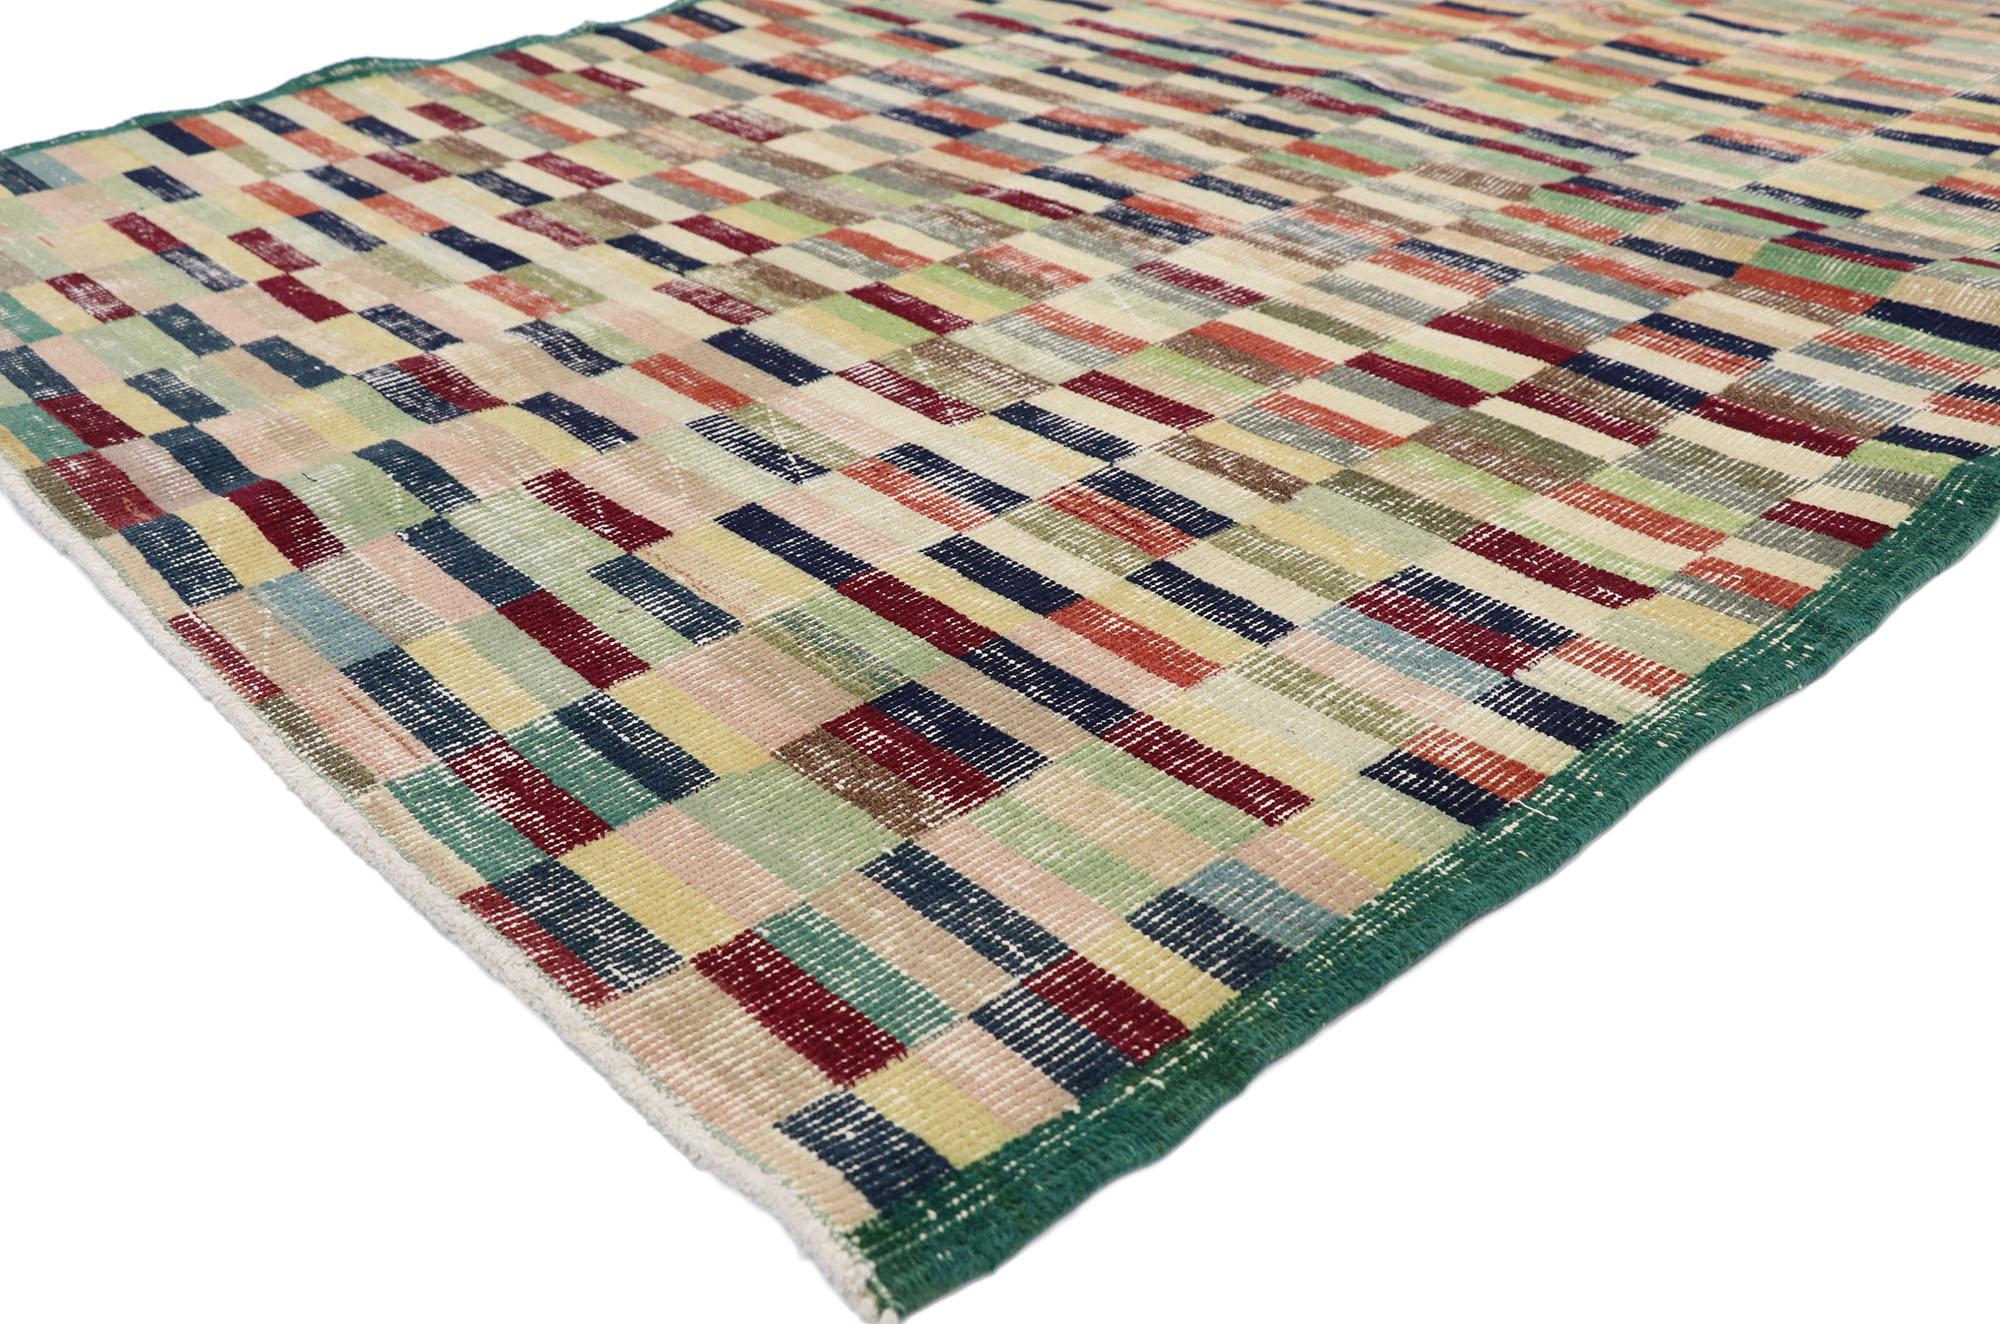 52601 Zeki Muren distressed vintage Turkish Sivas runner with cubism Art Deco style. Warm and inviting combined with a bold pattern, this hand knotted wool distressed vintage Turkish Sivas runner embodies bold Art Deco style with a modern artisan